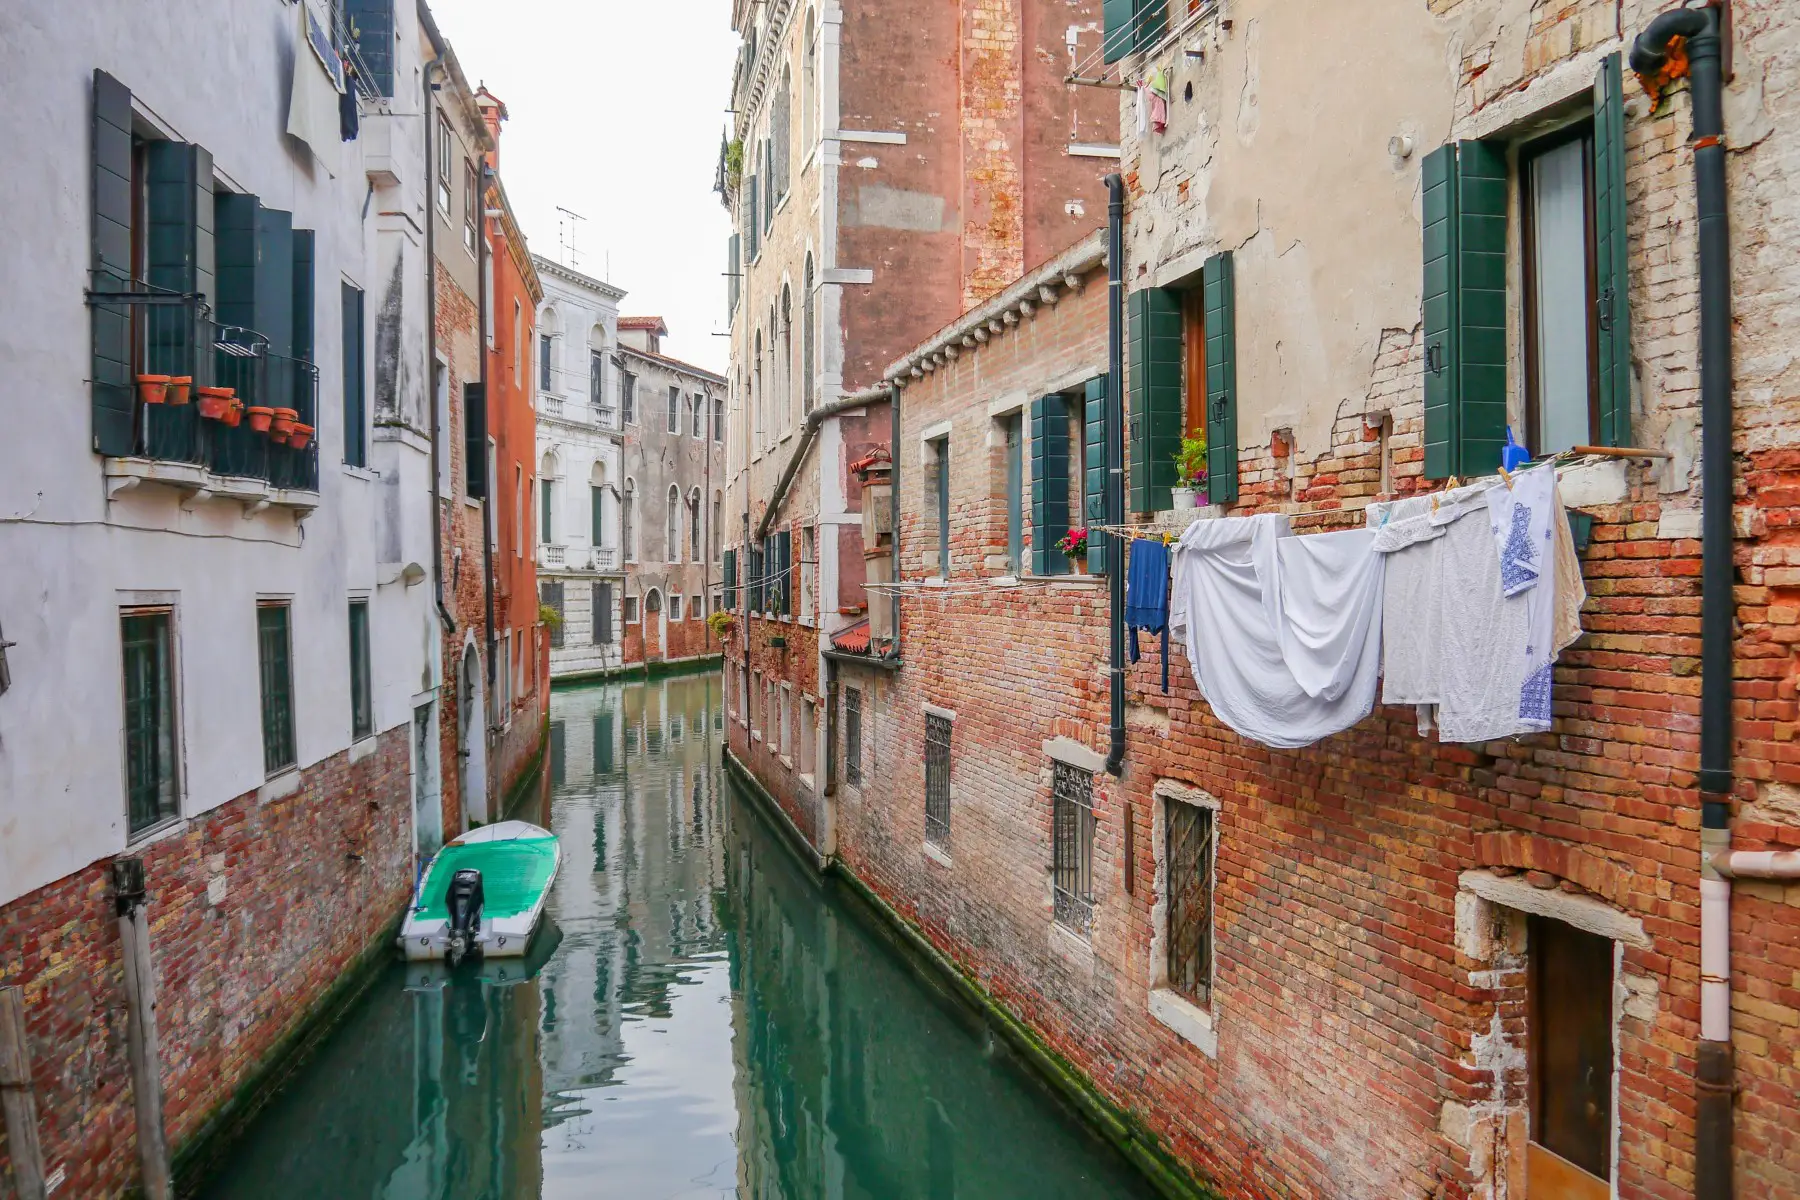 Laundry hanging near a building, along a canal alley in Venice, Italy.